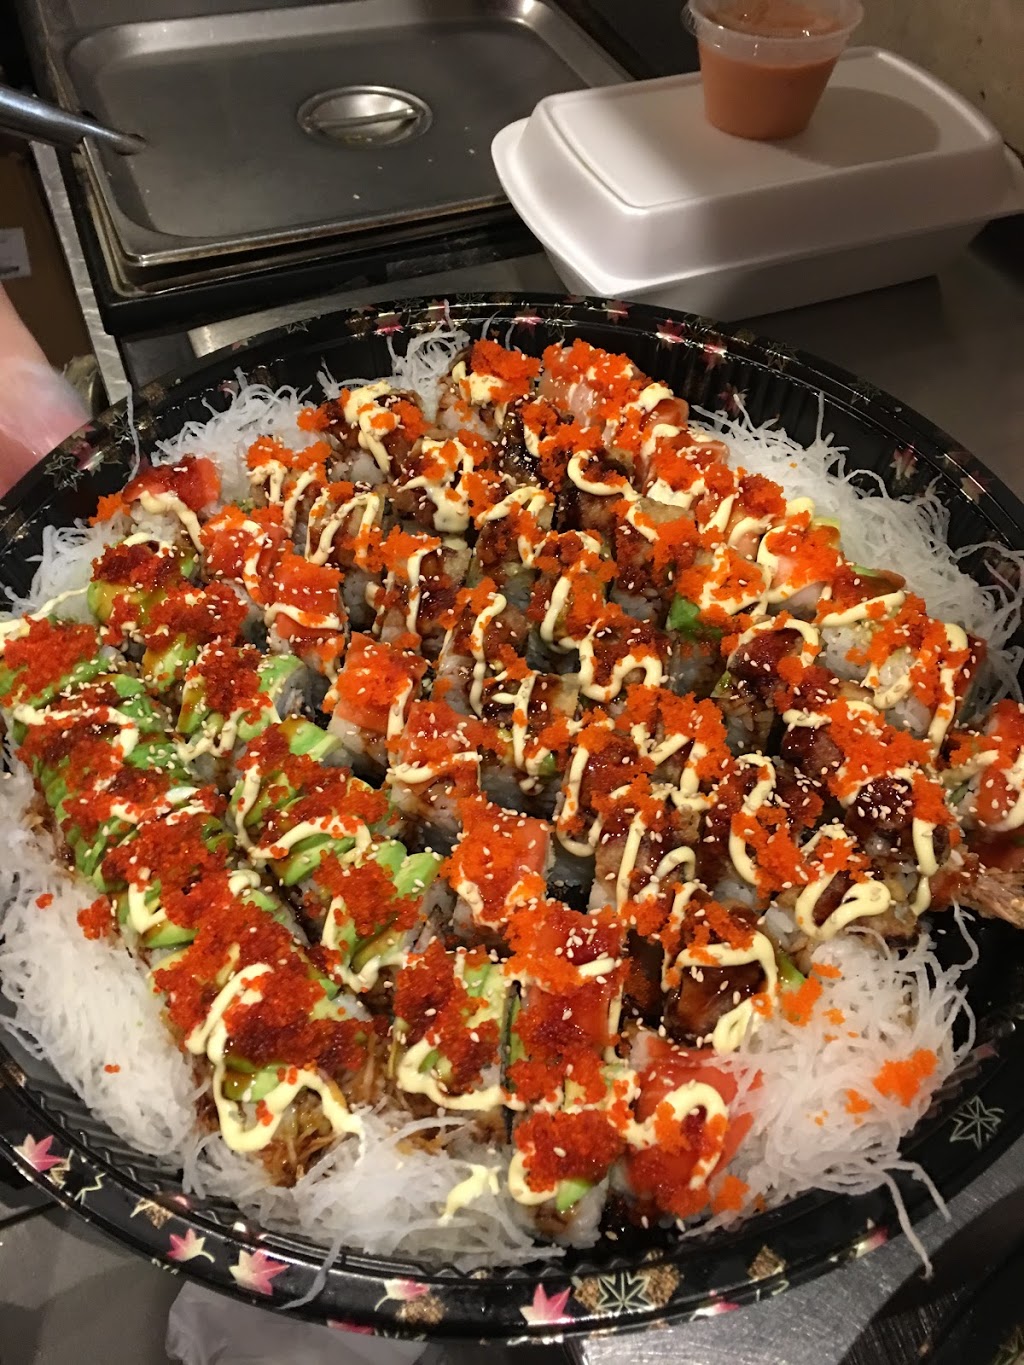 Volcano Sushi & Grill | 1991 E Hastings St, Vancouver, BC V5L 1T2, Canada | Phone: (604) 566-9918